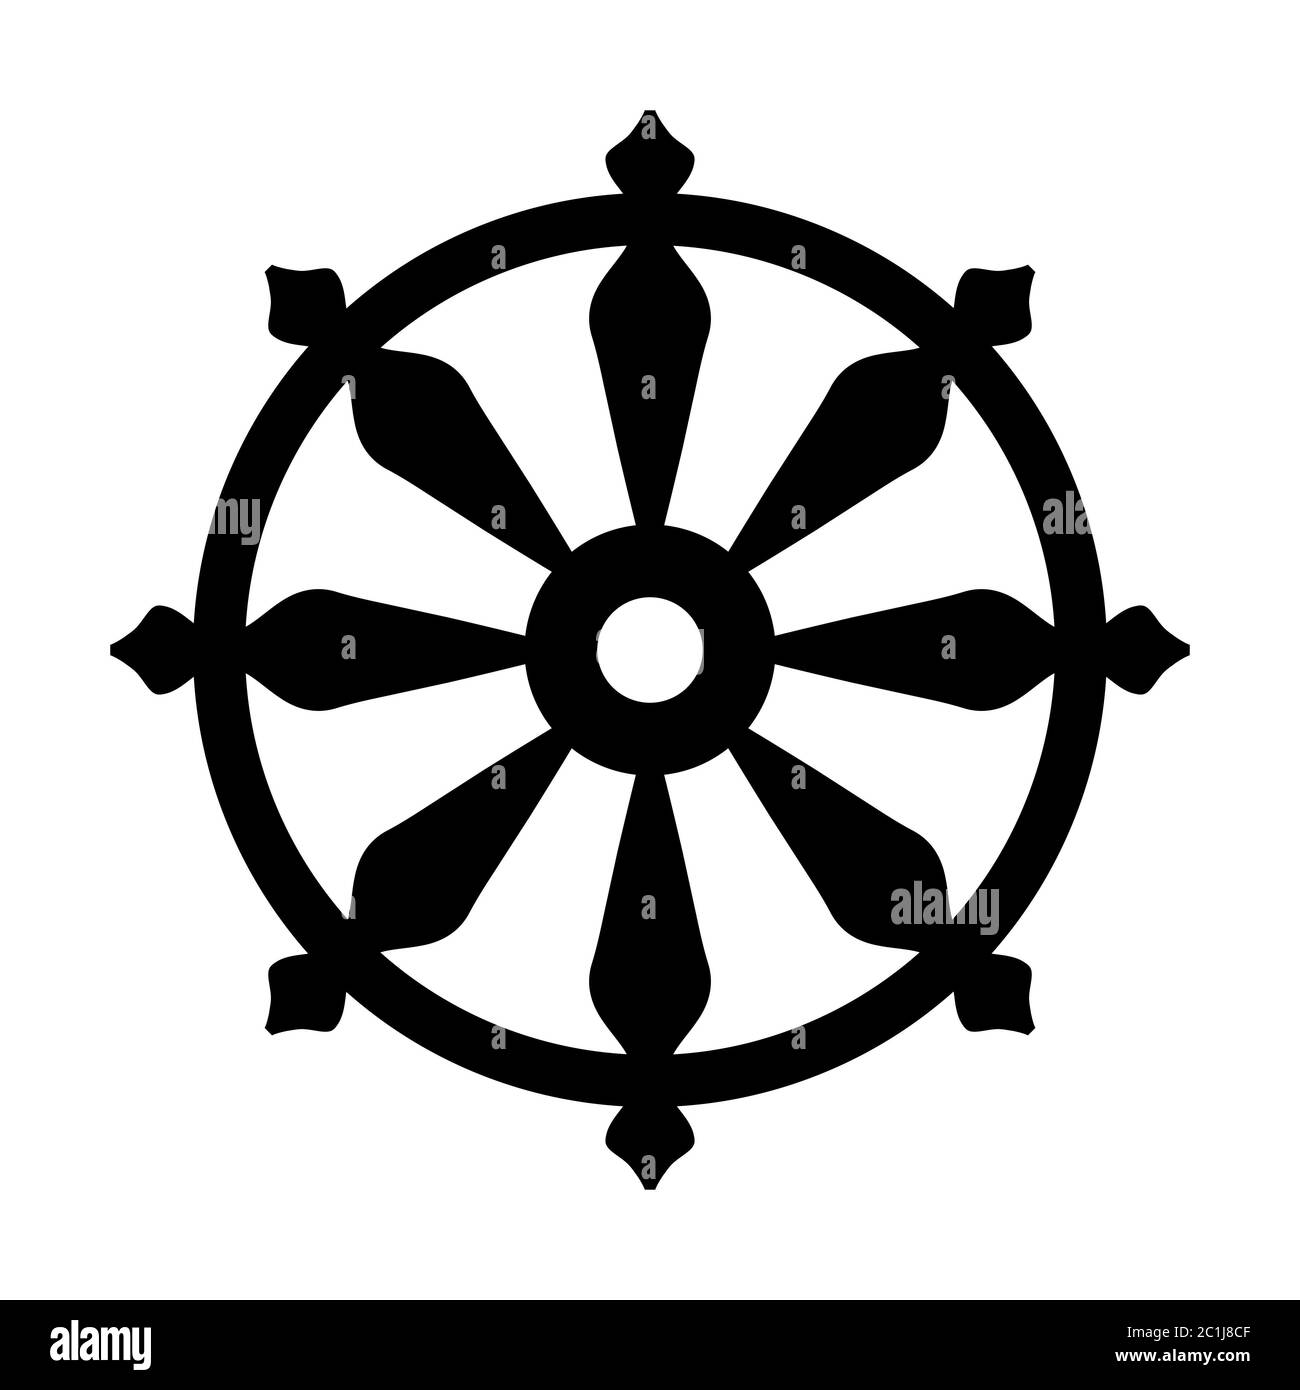 Wheel of Samsara — Symbol of Reincarnation, the cycle of death and rebirth (Sacral sign of all Indian religions). Stock Photo